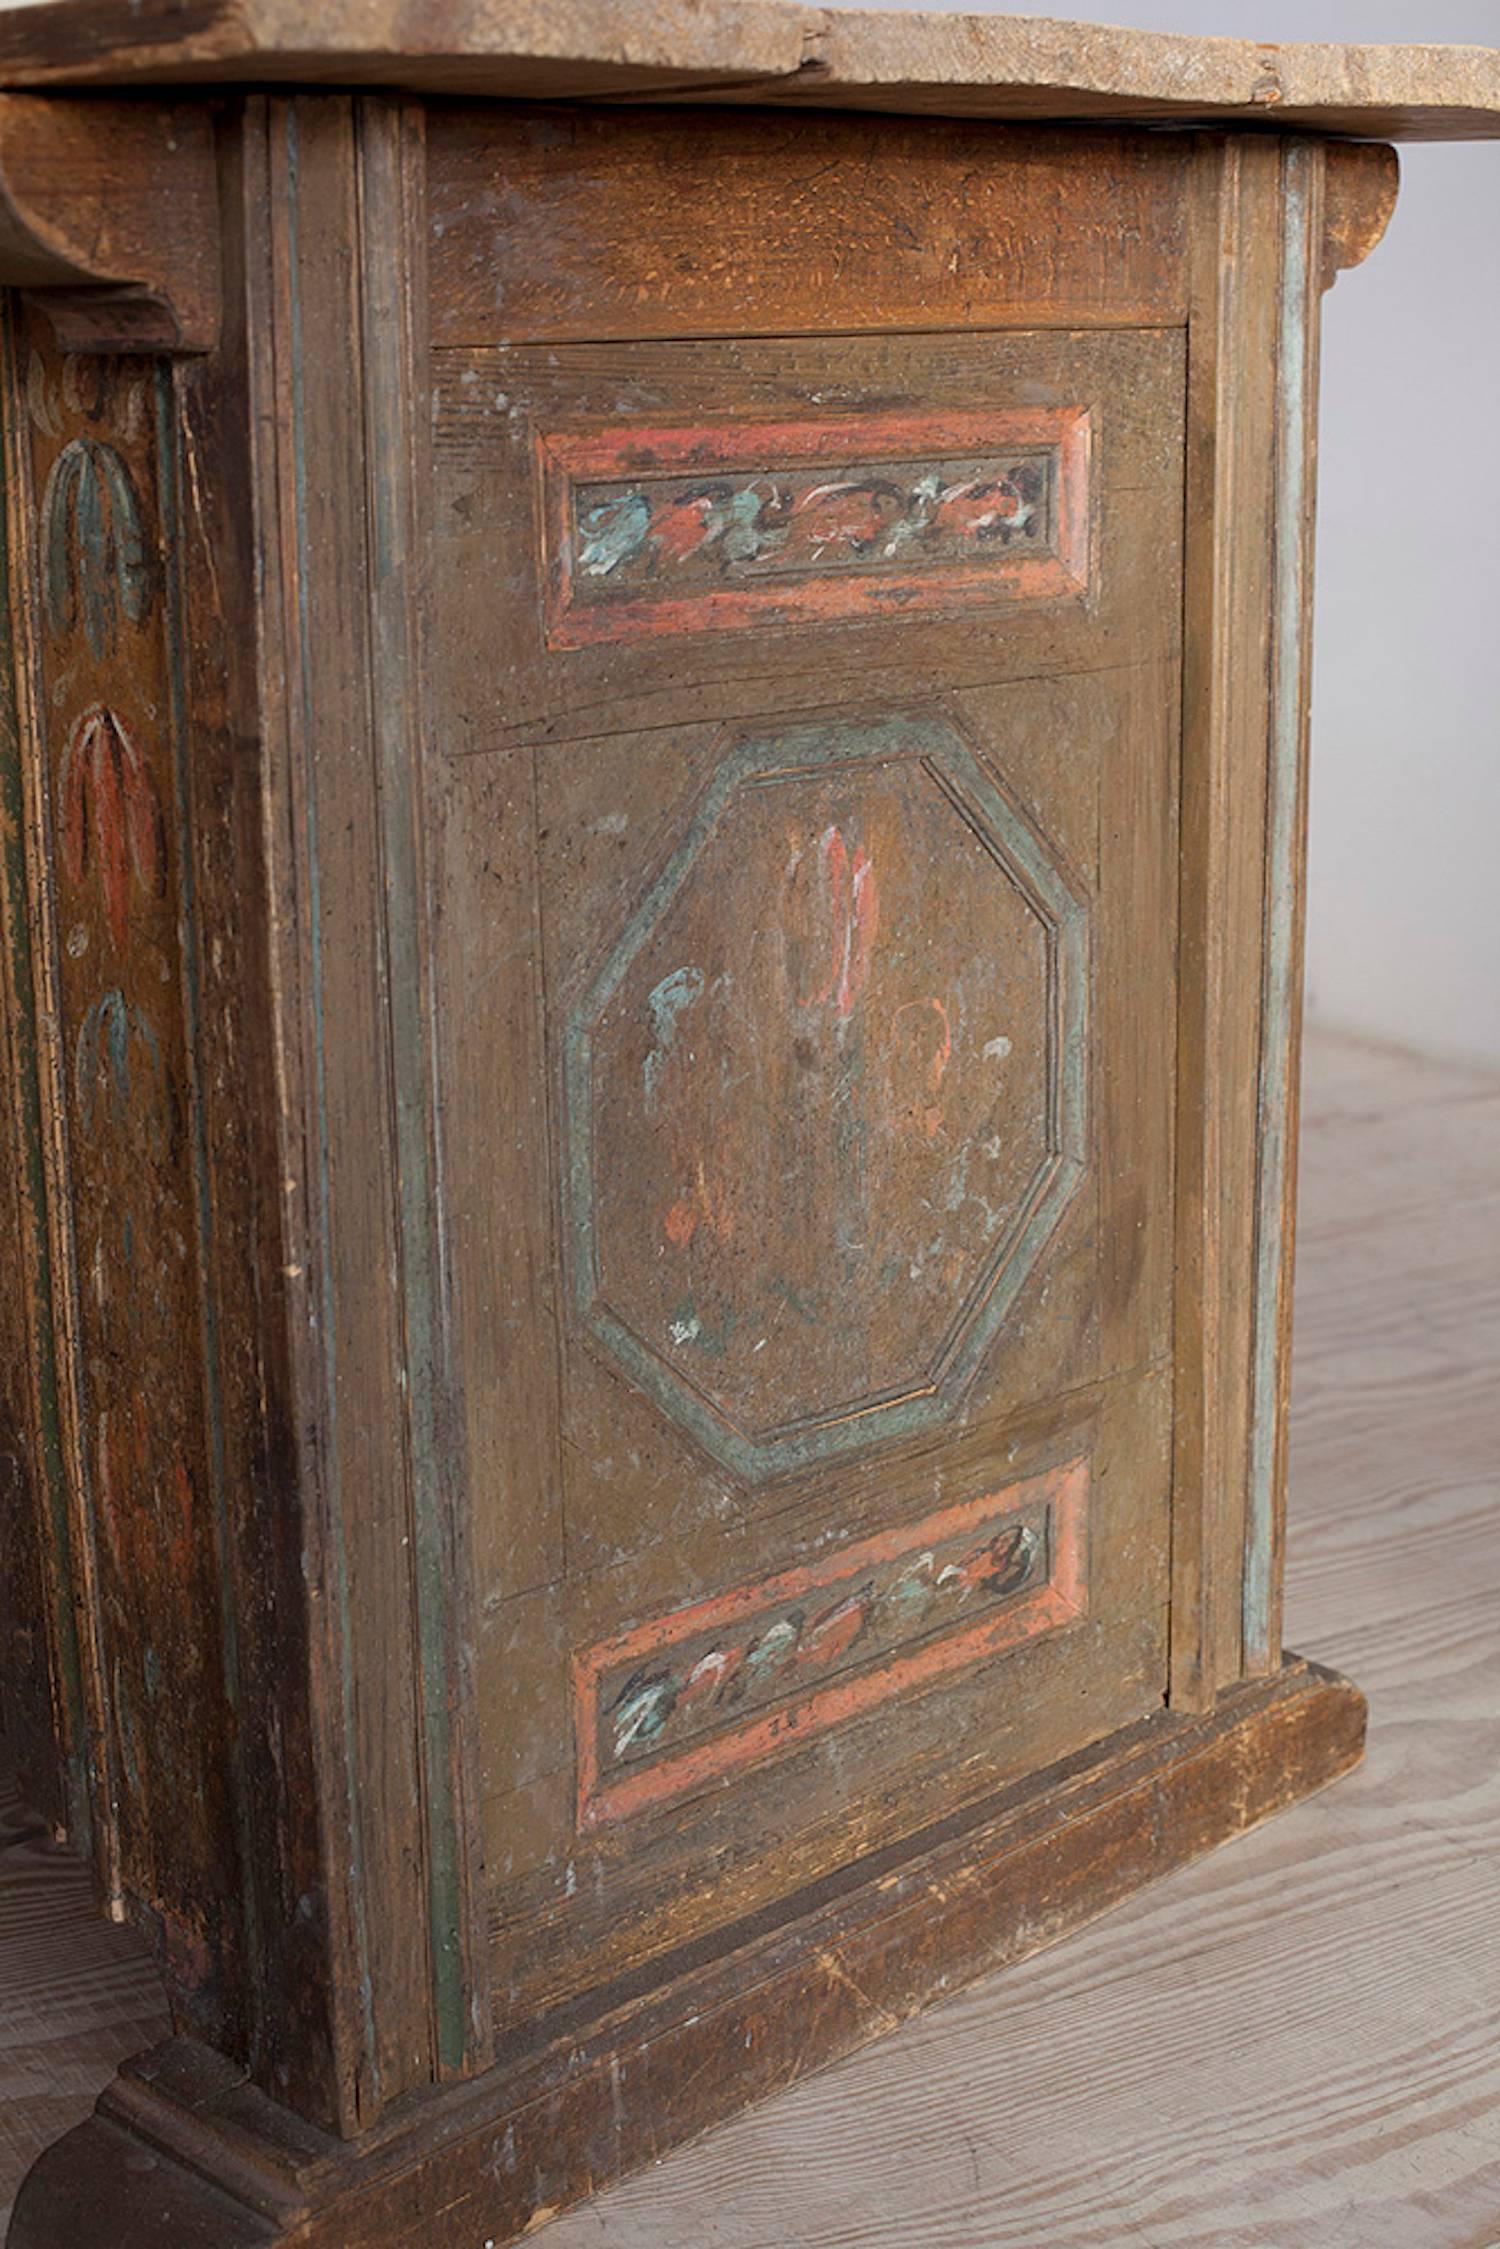 Hand-Crafted Rare Swedish Kistbord Med Dörr, 18th Century Sideboard, Inscribed and Dated 1786